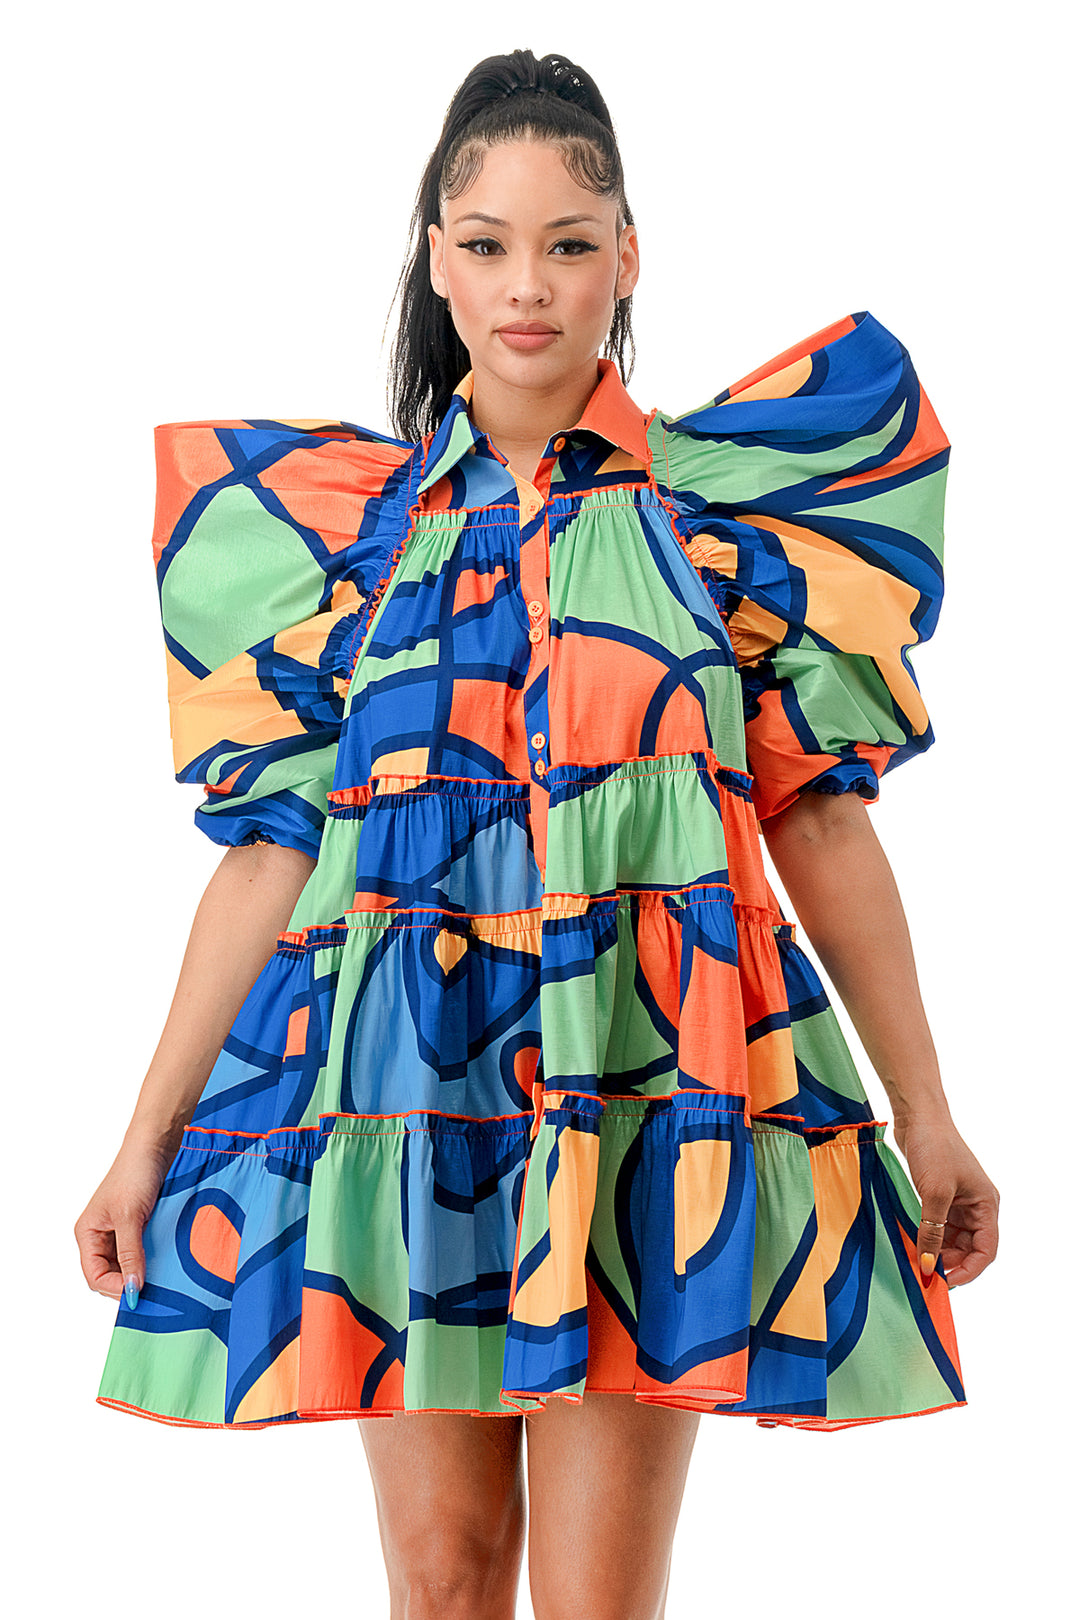 a woman is wearing a colorful dress with a frilled neckline